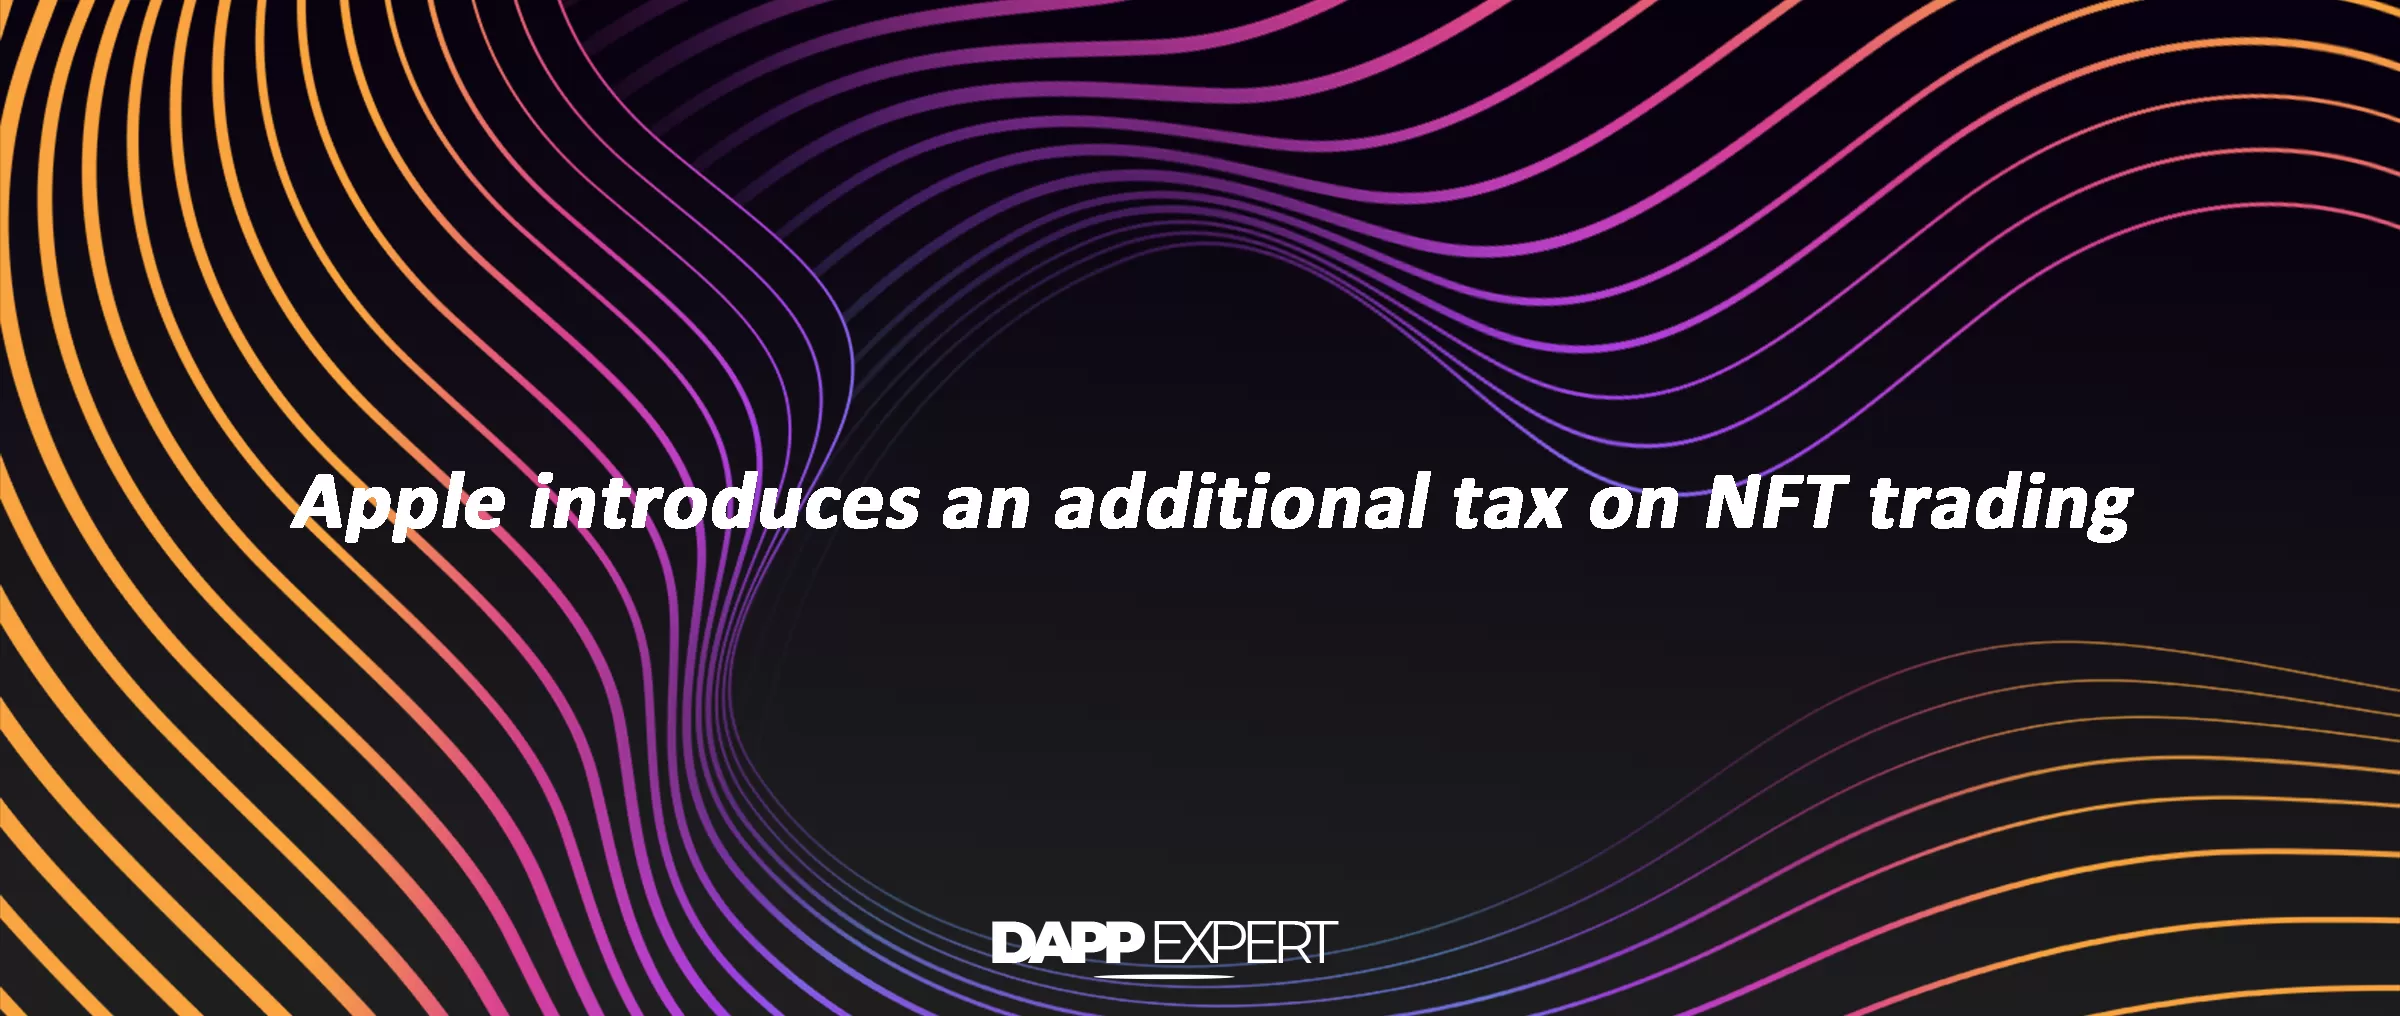 Apple introduces an additional tax on NFT trading